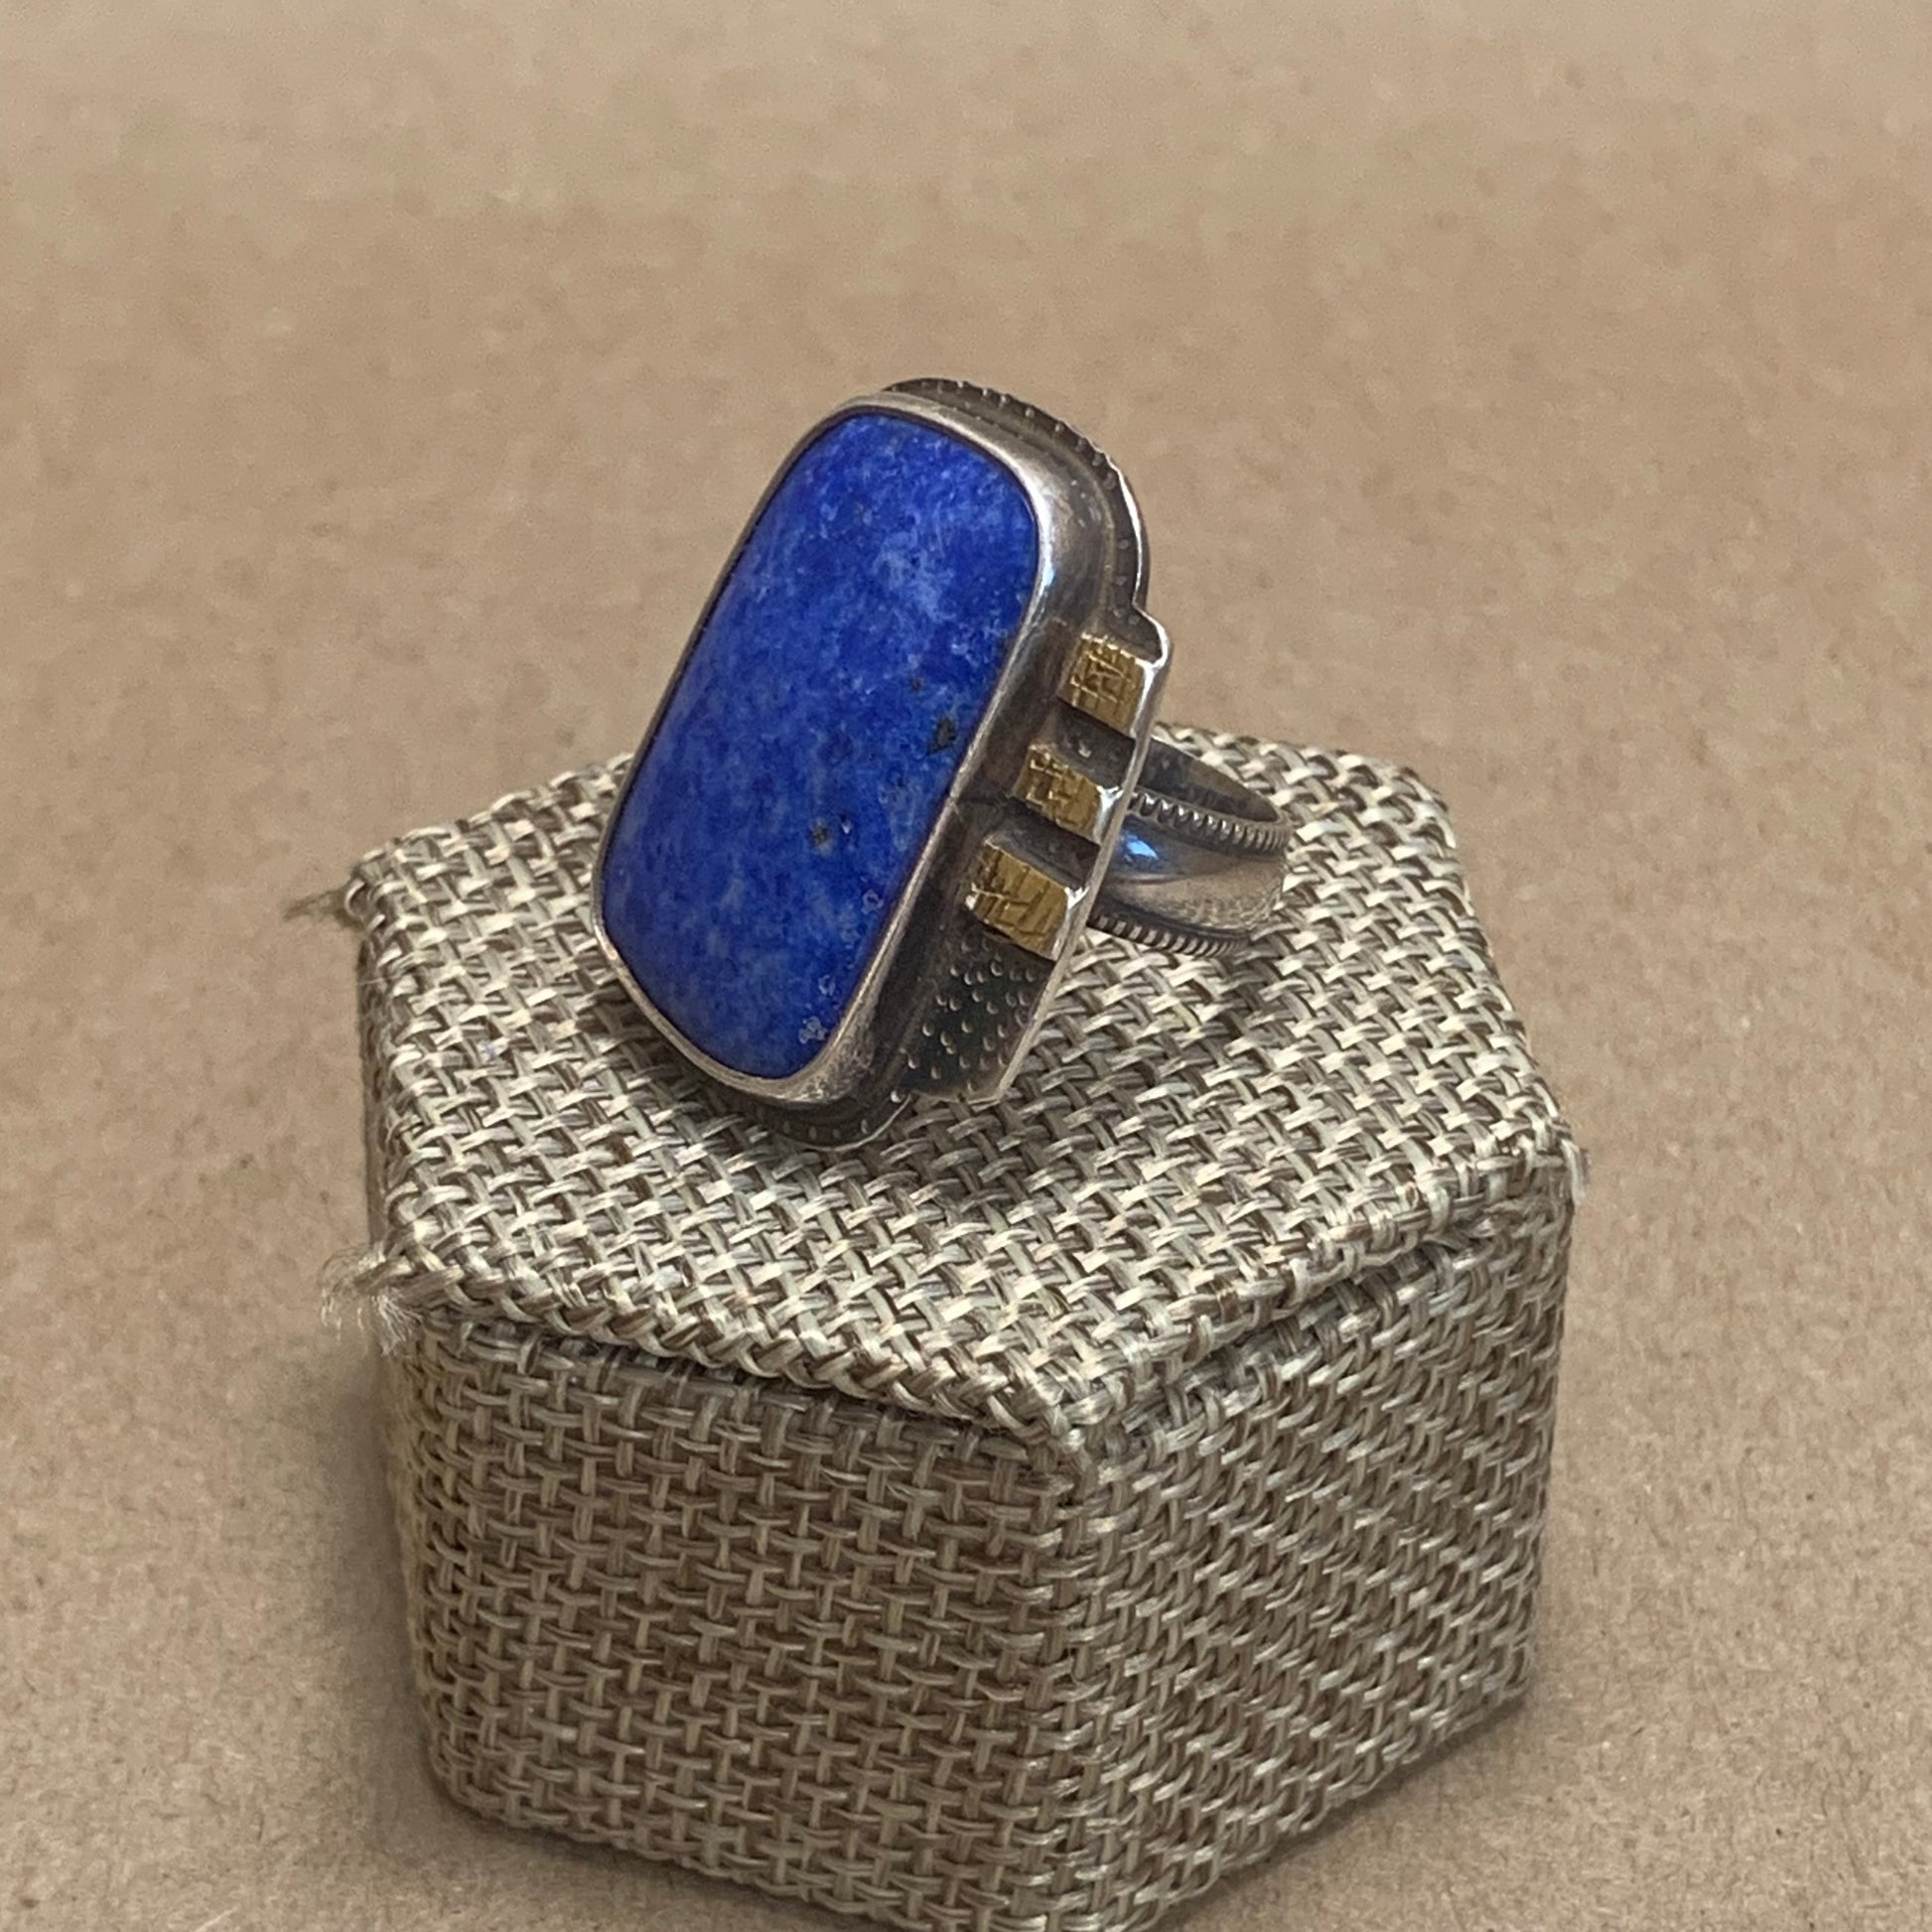 Size 6.75 Lapis, 22K Gold and Sterling Silver Ring